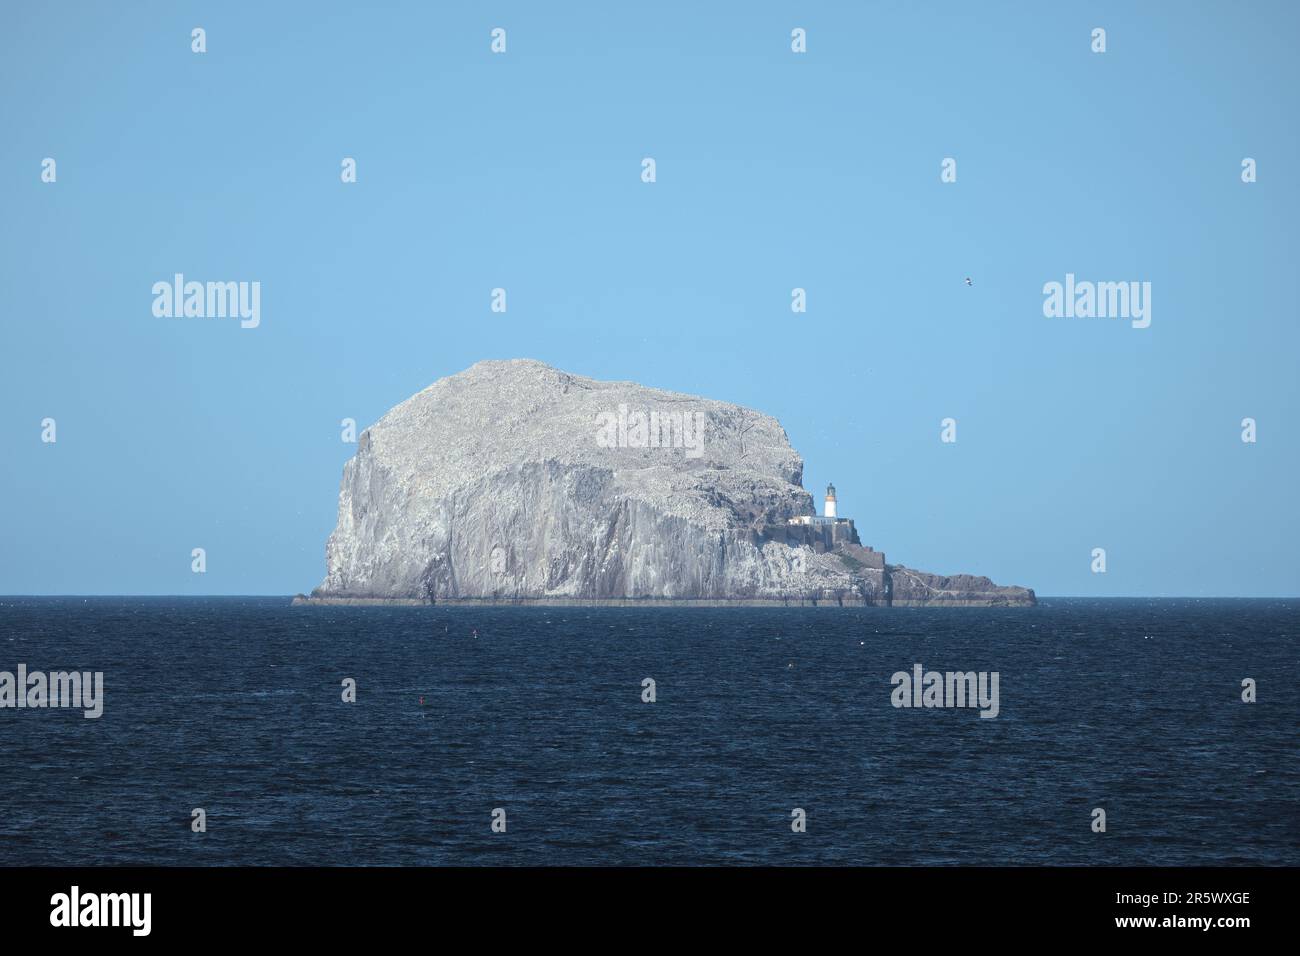 The Bass Rock island and lighthouse in the Firth of Forth in the east of Scotland. Bass Rock, Scotland, United Kingdom Stock Photo